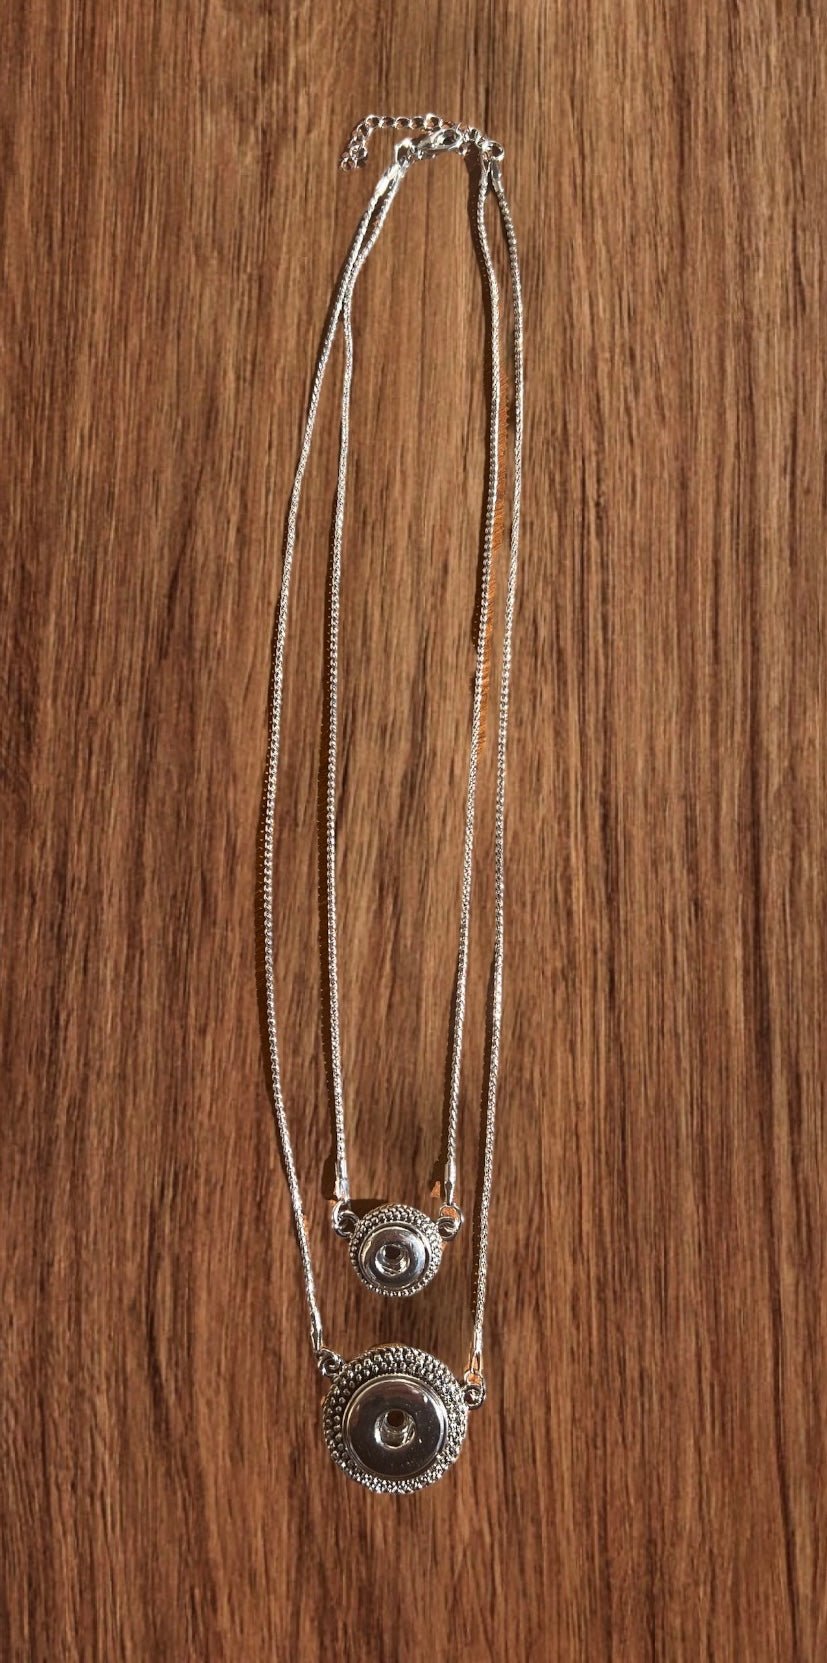 Silver Tone Double Snap Jewelry Necklace Fits One 12MM Snap and One 20MM Snap